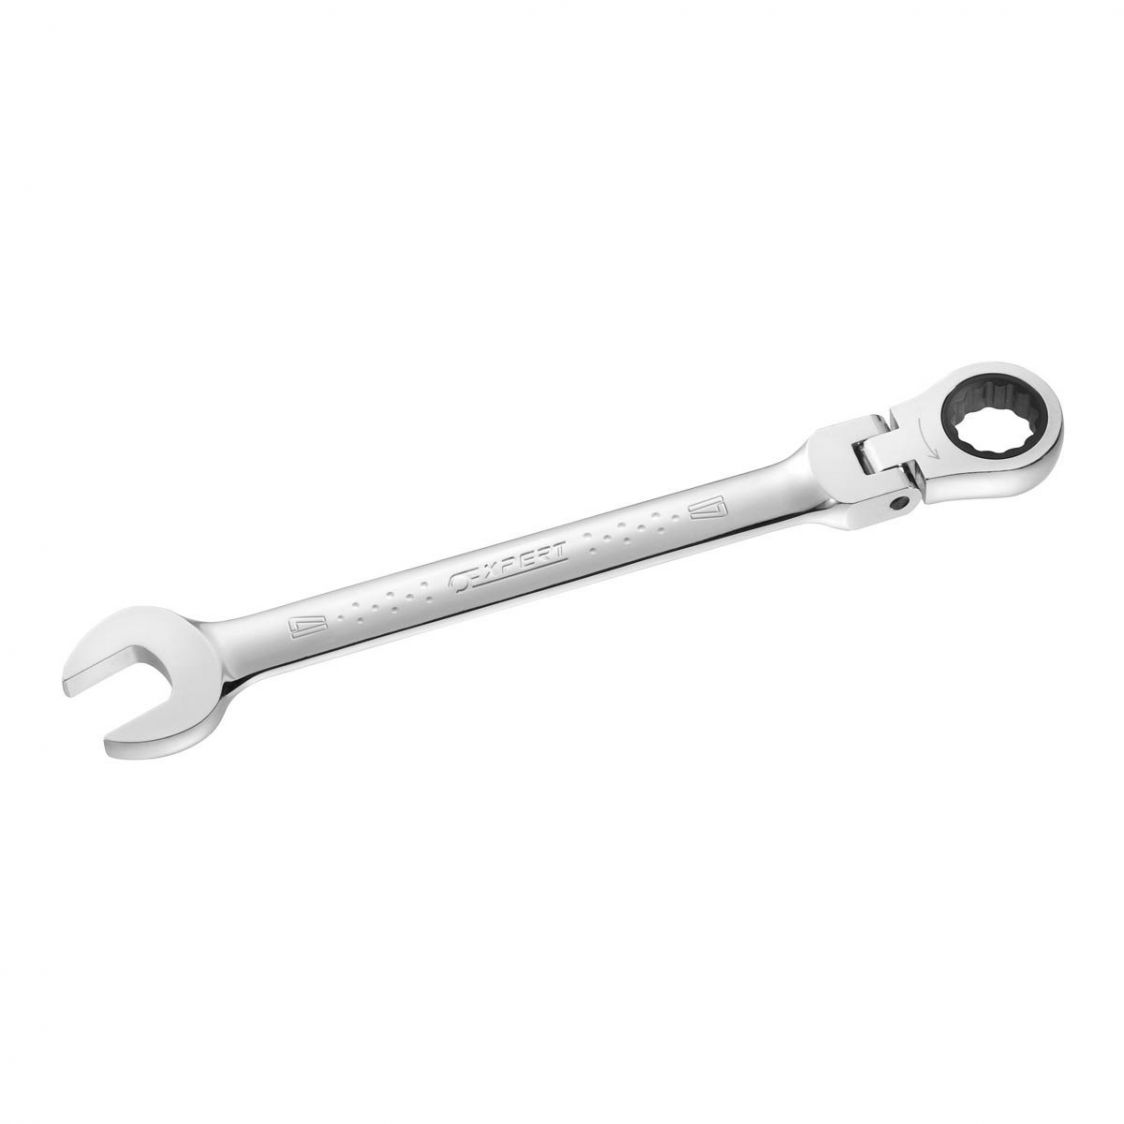 EXPERT by FACOM E110901 - 8mm Metric Hinged Ratchet Combination Spanner